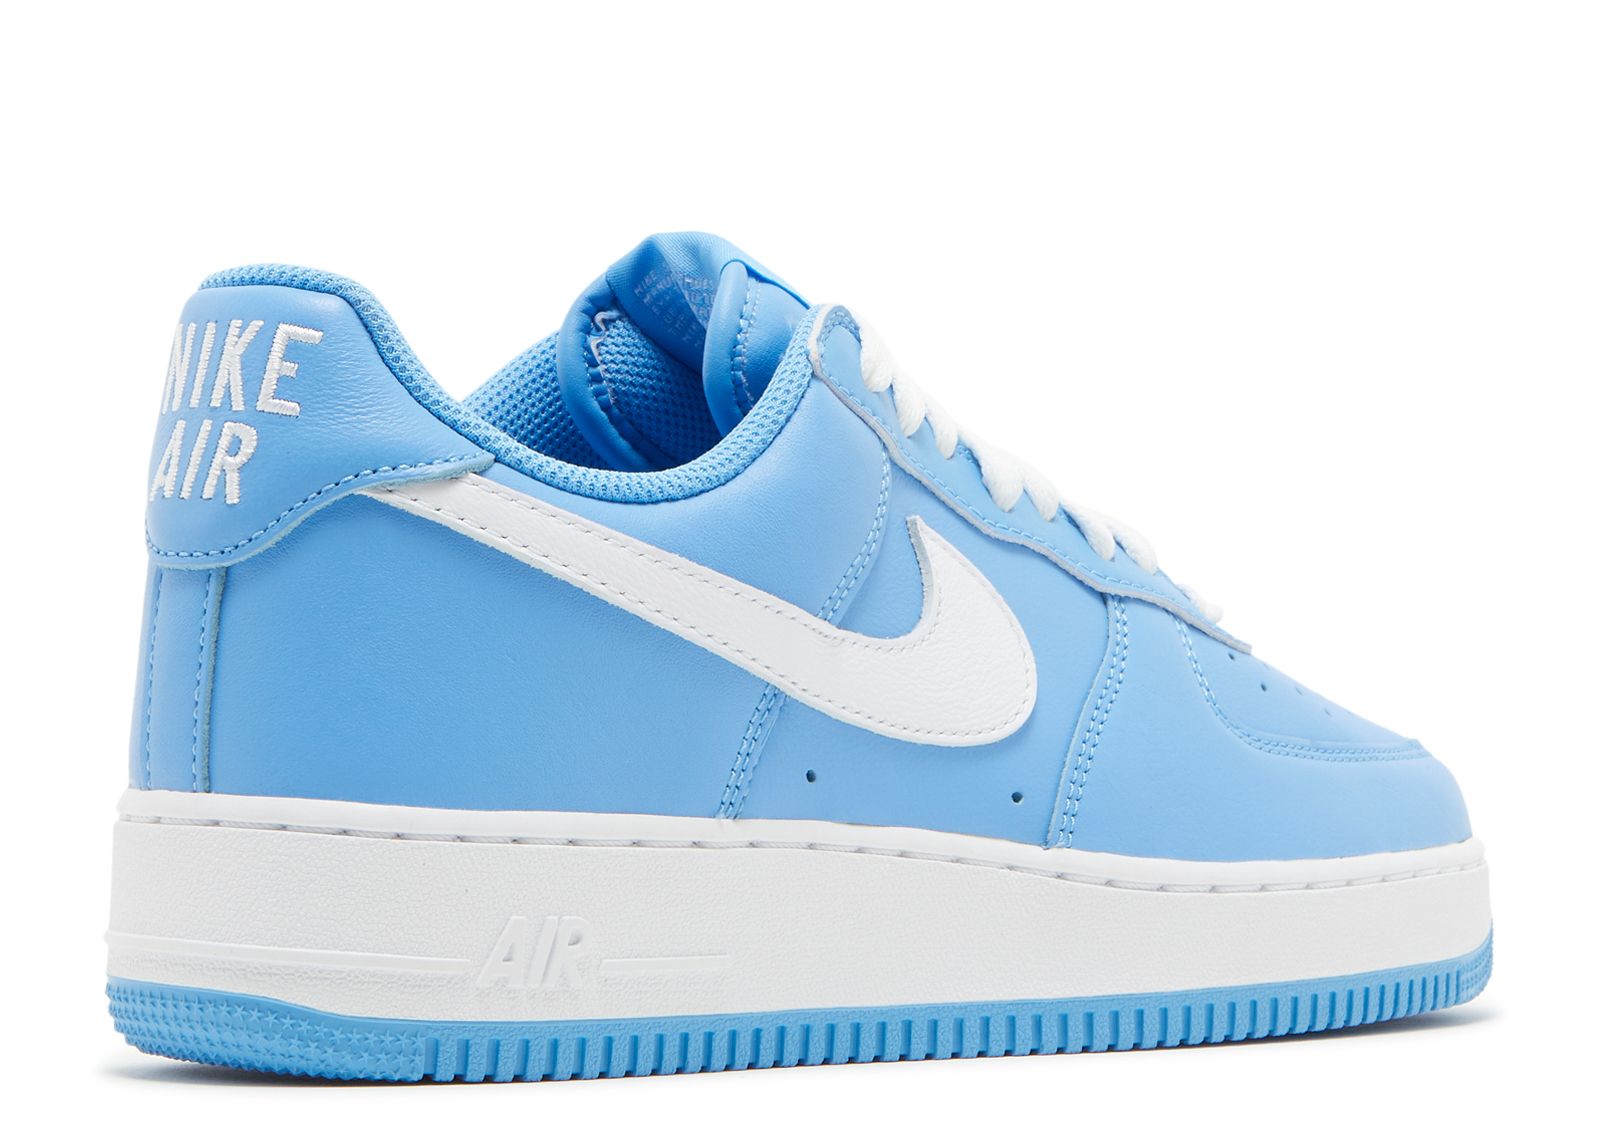 University Blue Hues Outline This Nike Air Force 1 Low - Sneaker News